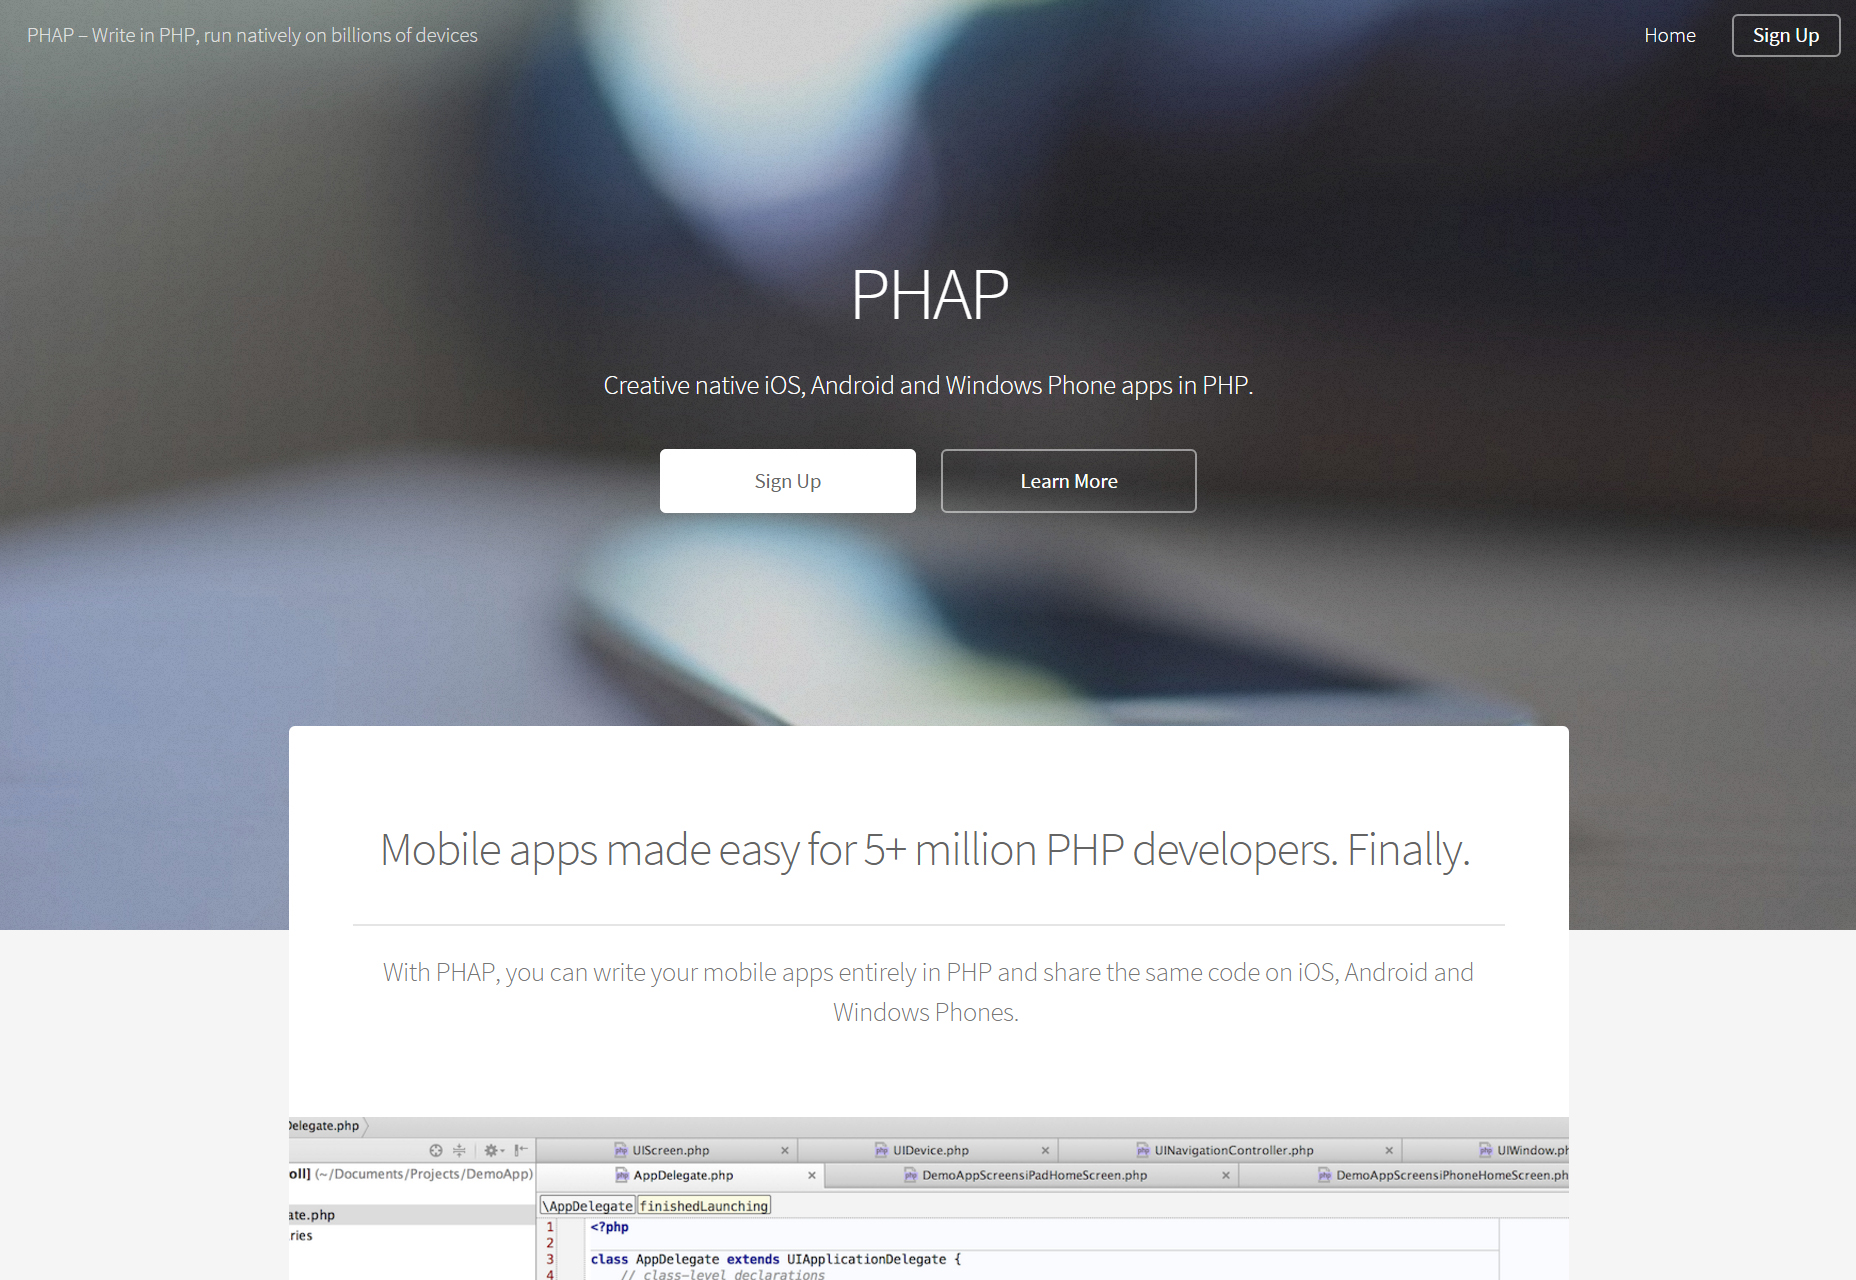 PHAP: Entwicklung mobiler Apps in PHP